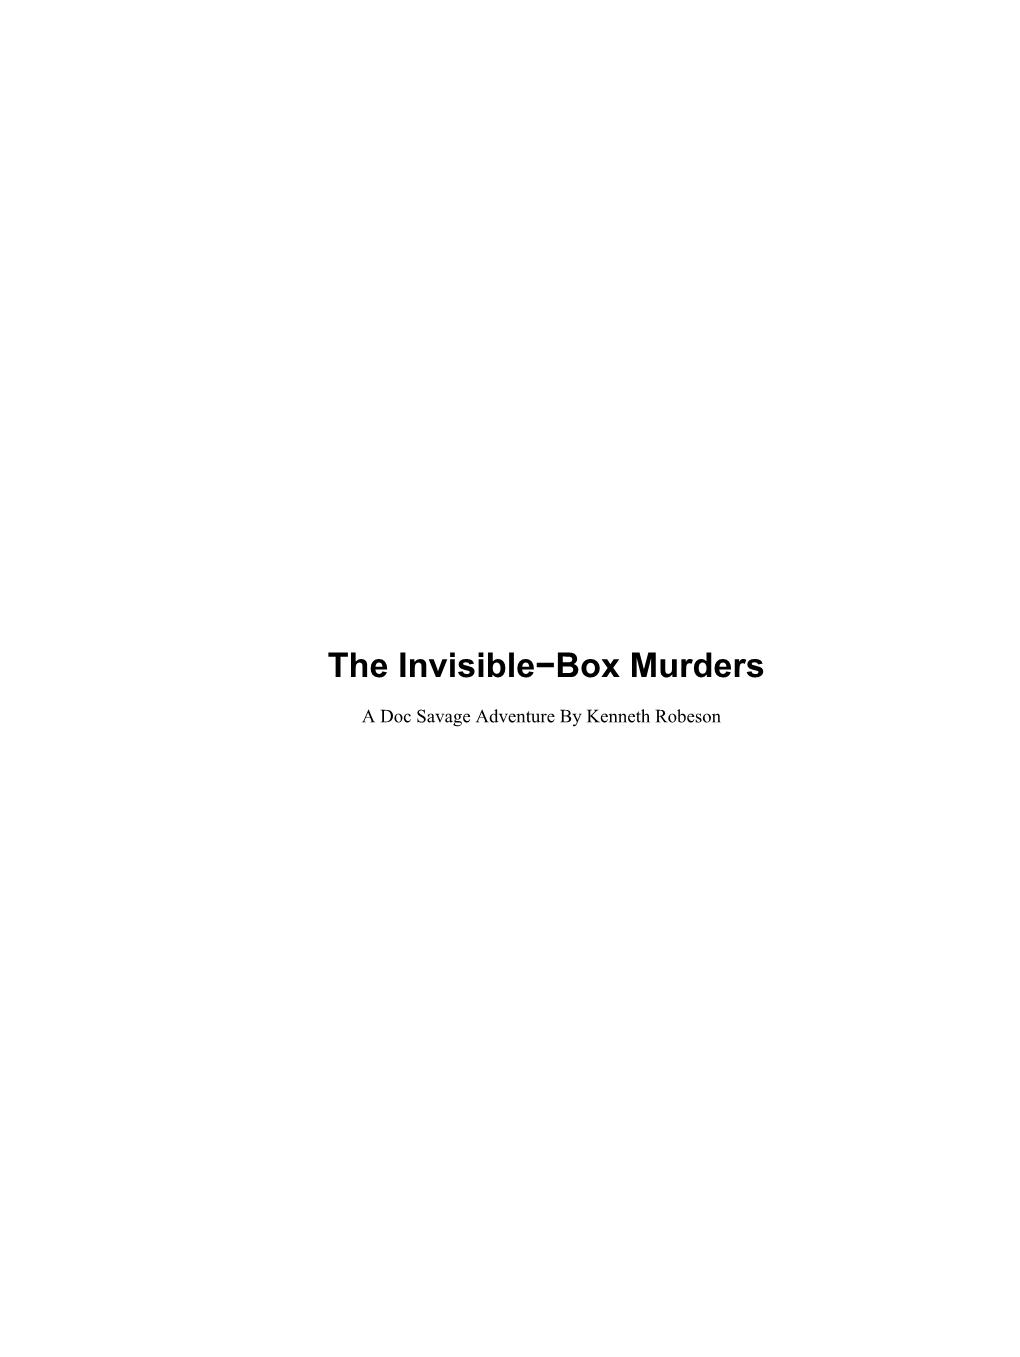 The Invisible-Box Murders